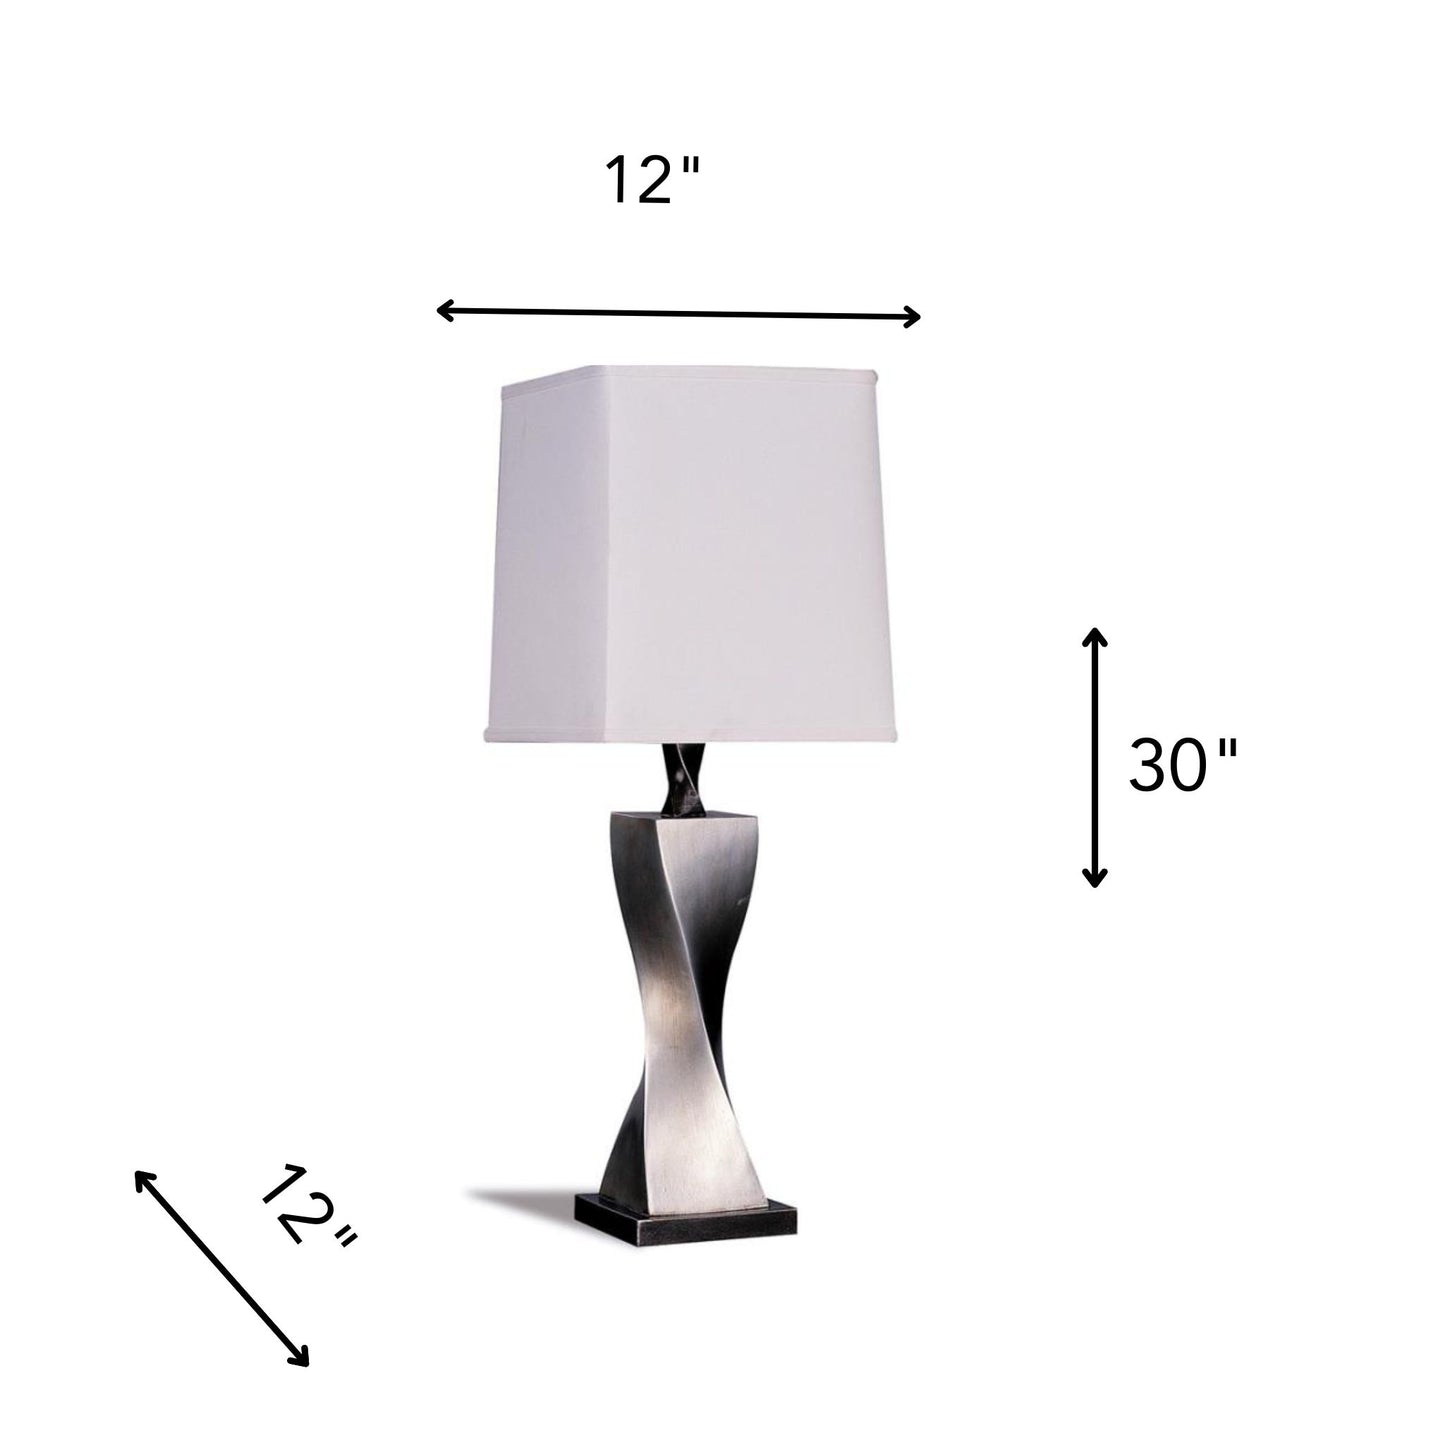 KEENE Square Shade Table Lamps White and Antique Silver